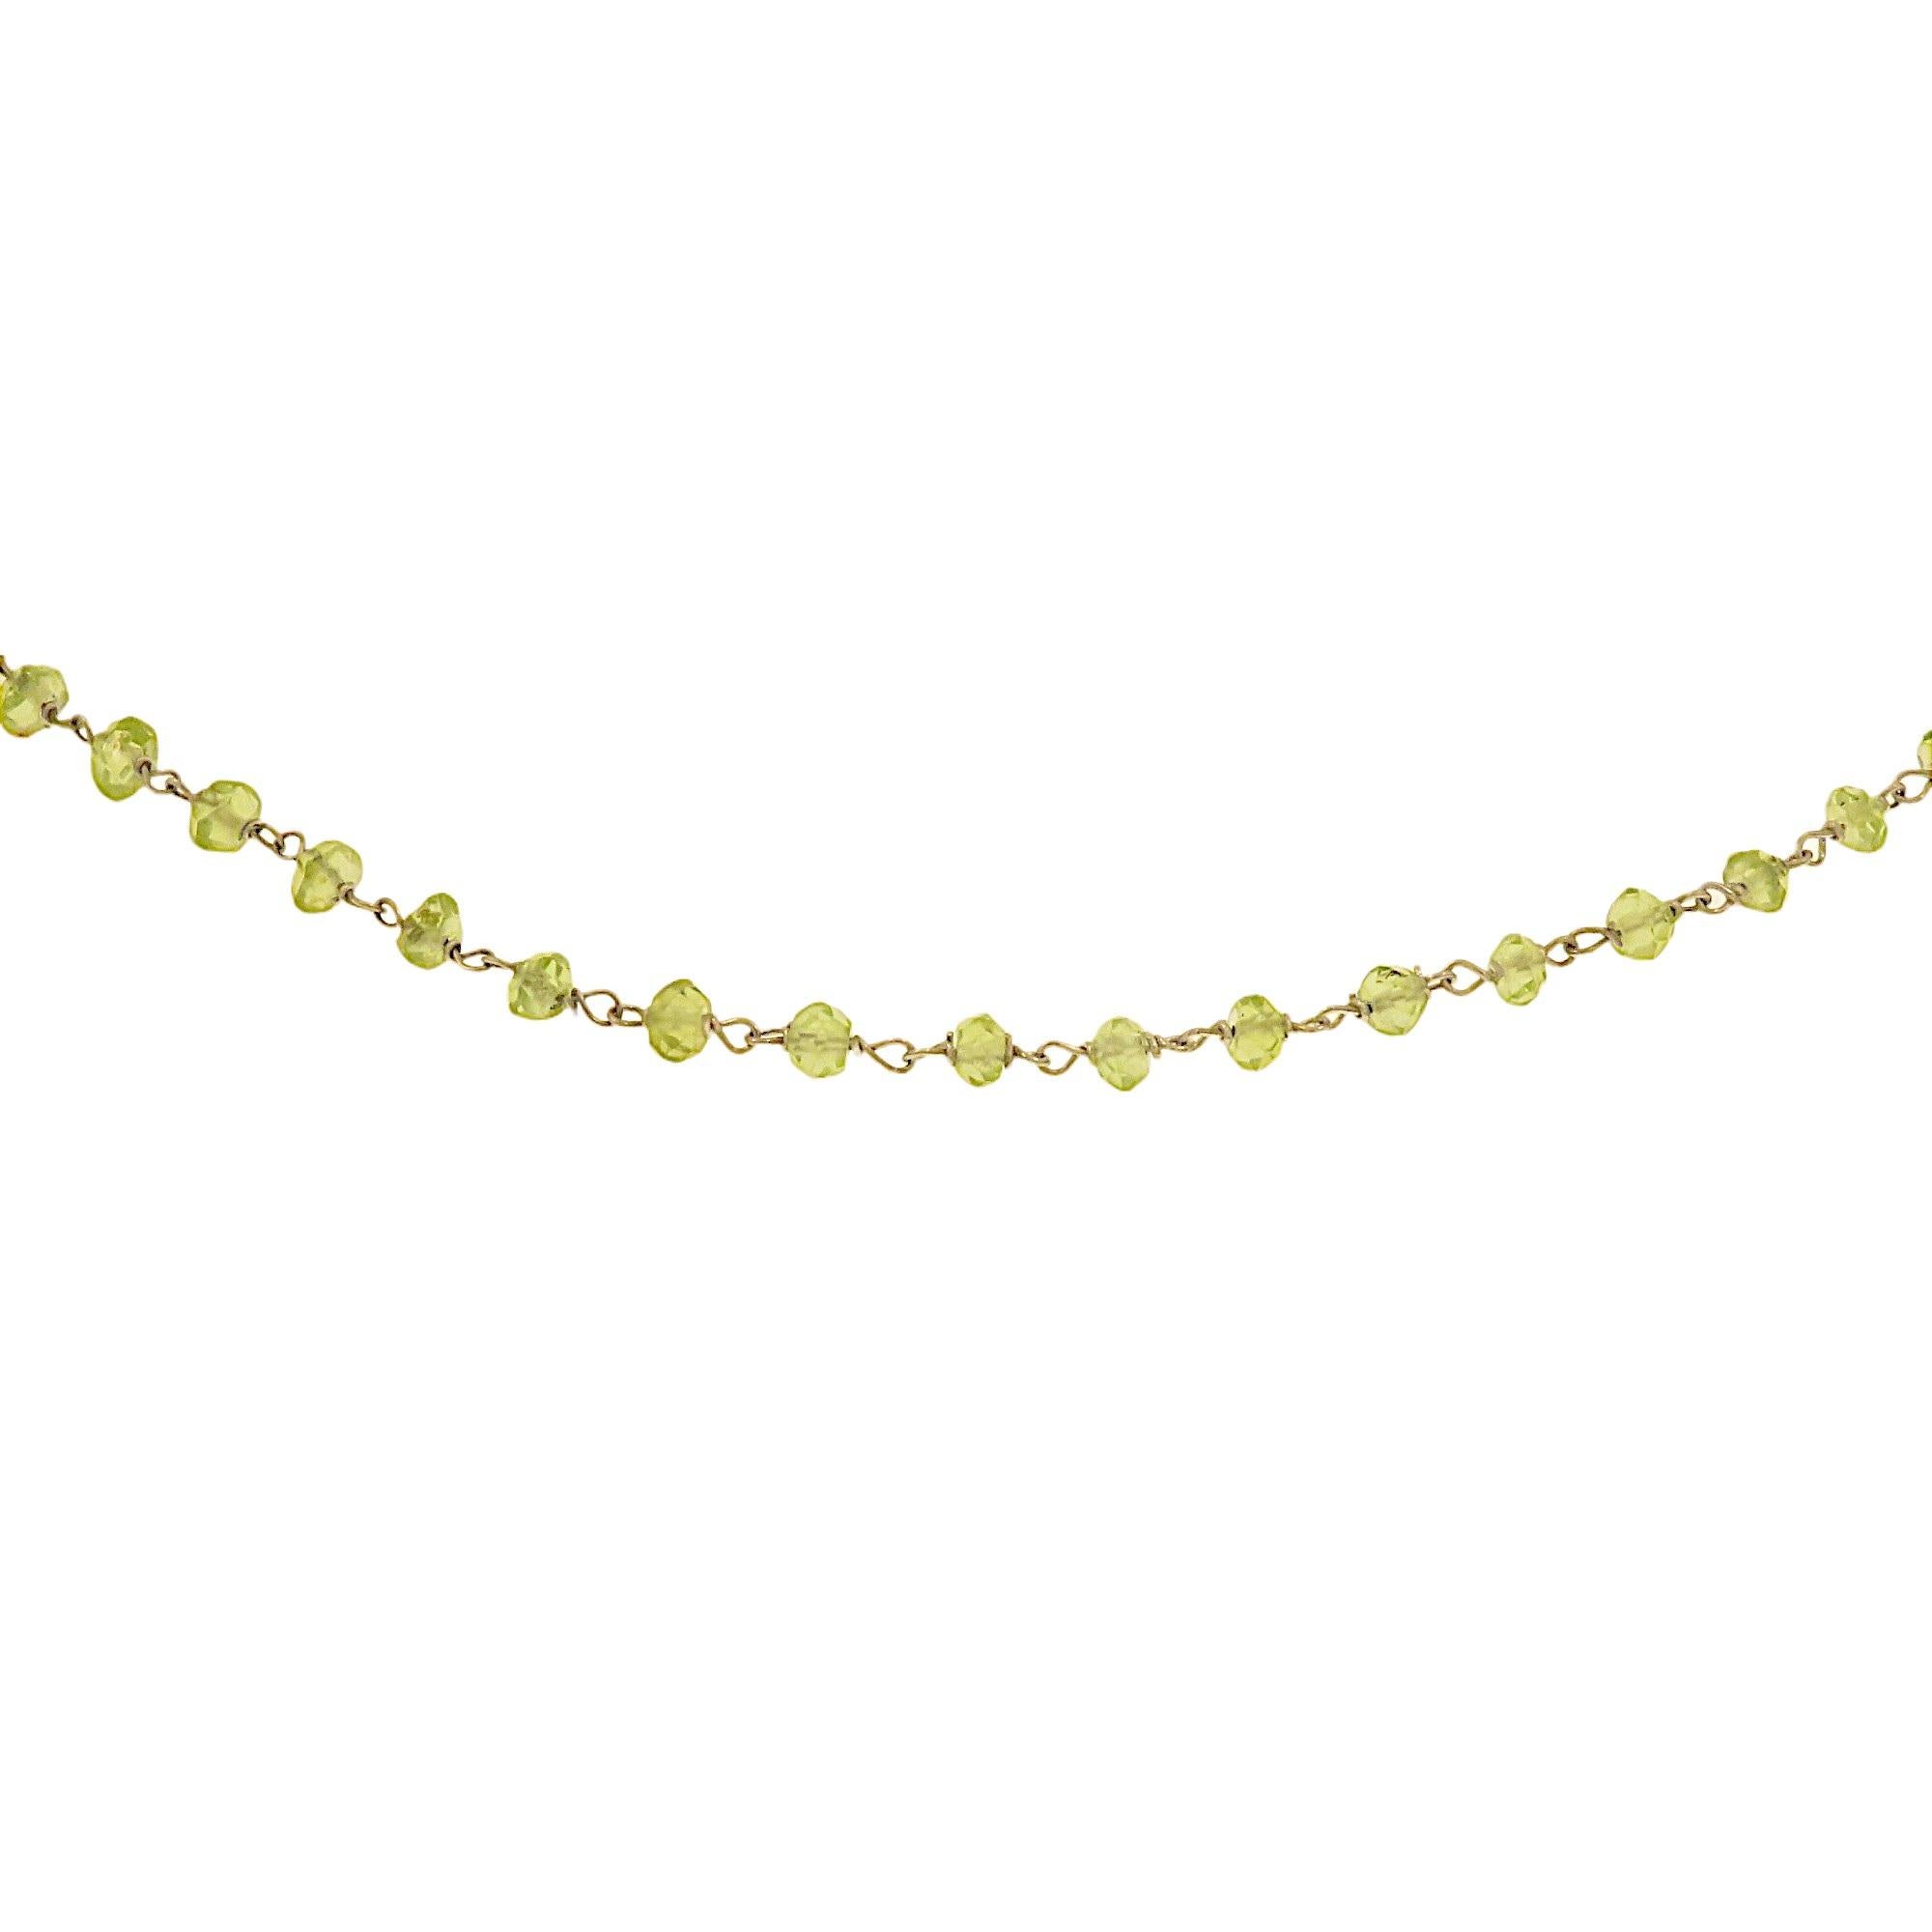 Necklace formed of small 3 mm / 0.118 inches peridot nuggets threaded into 18k white gold. The choker was handcrafted by Botta Gioielli in Milan, has the 750 mark of 18k gold and the 716MI mark of Botta Gioielli. The total length is 40 cm / 15.748